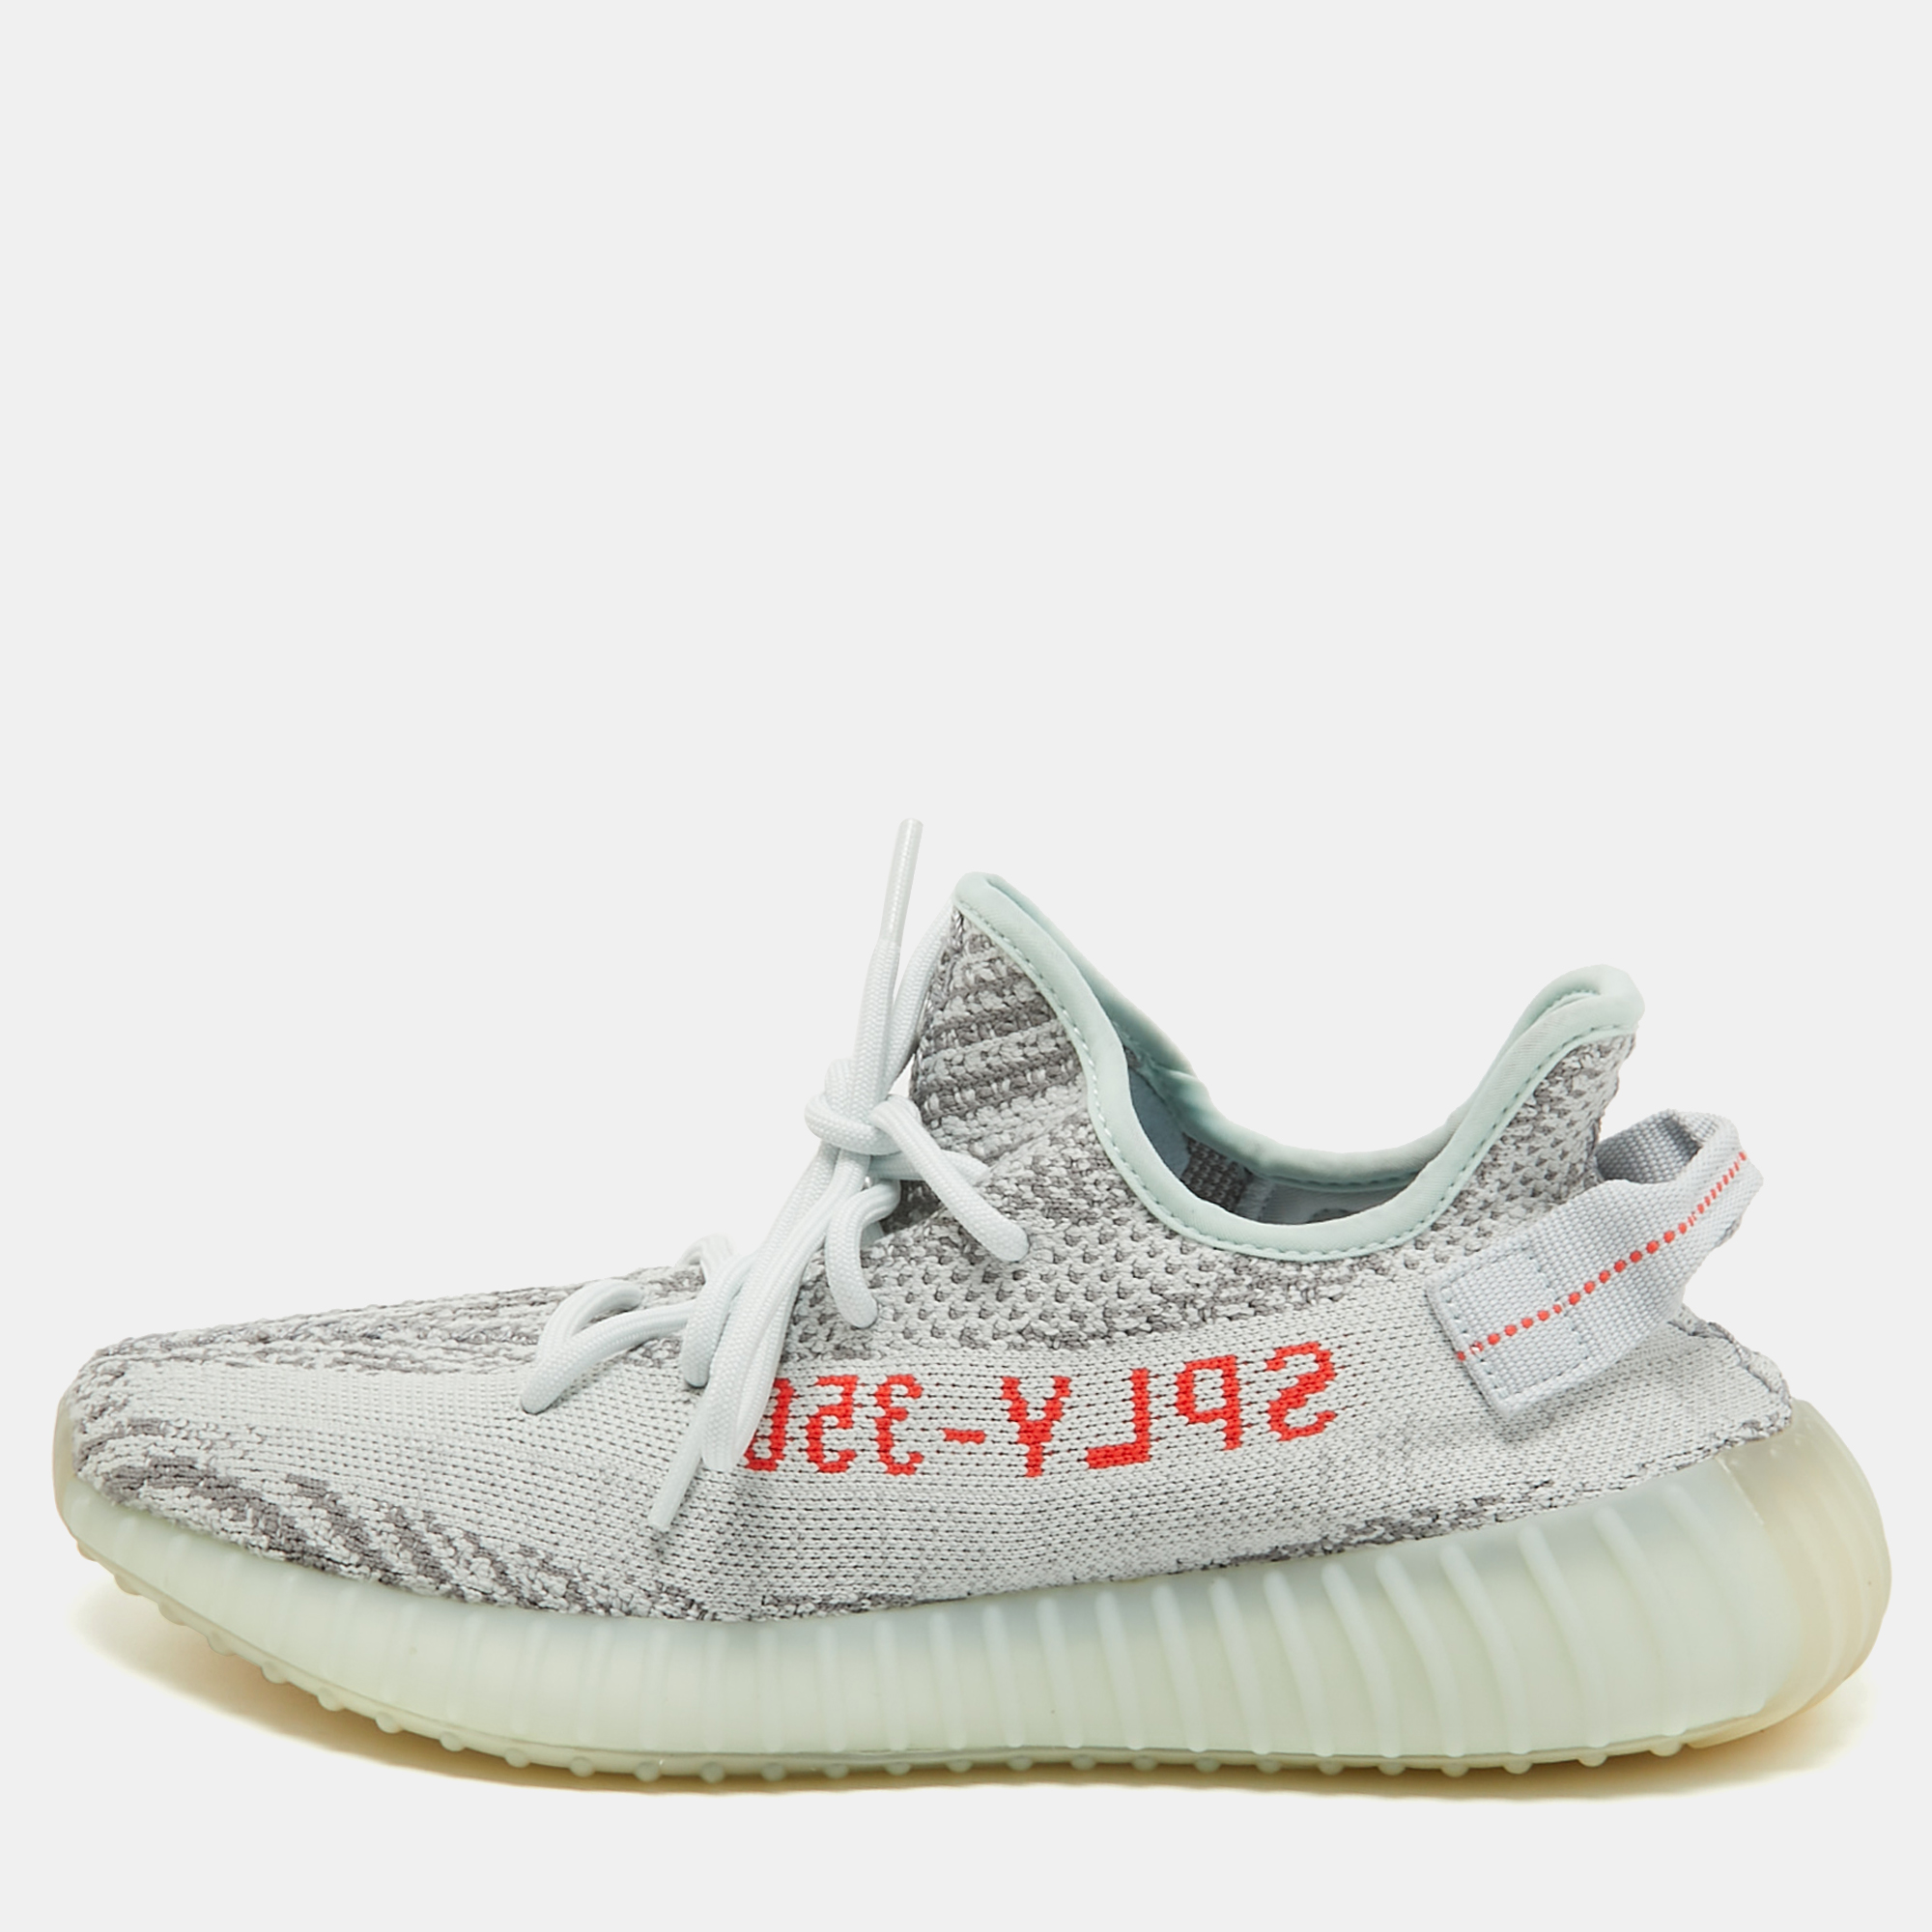 Yeezy X Adidas Grey Knit Fabric Boost 350 V2 Blue Tint Sneakers Size 42 2/3